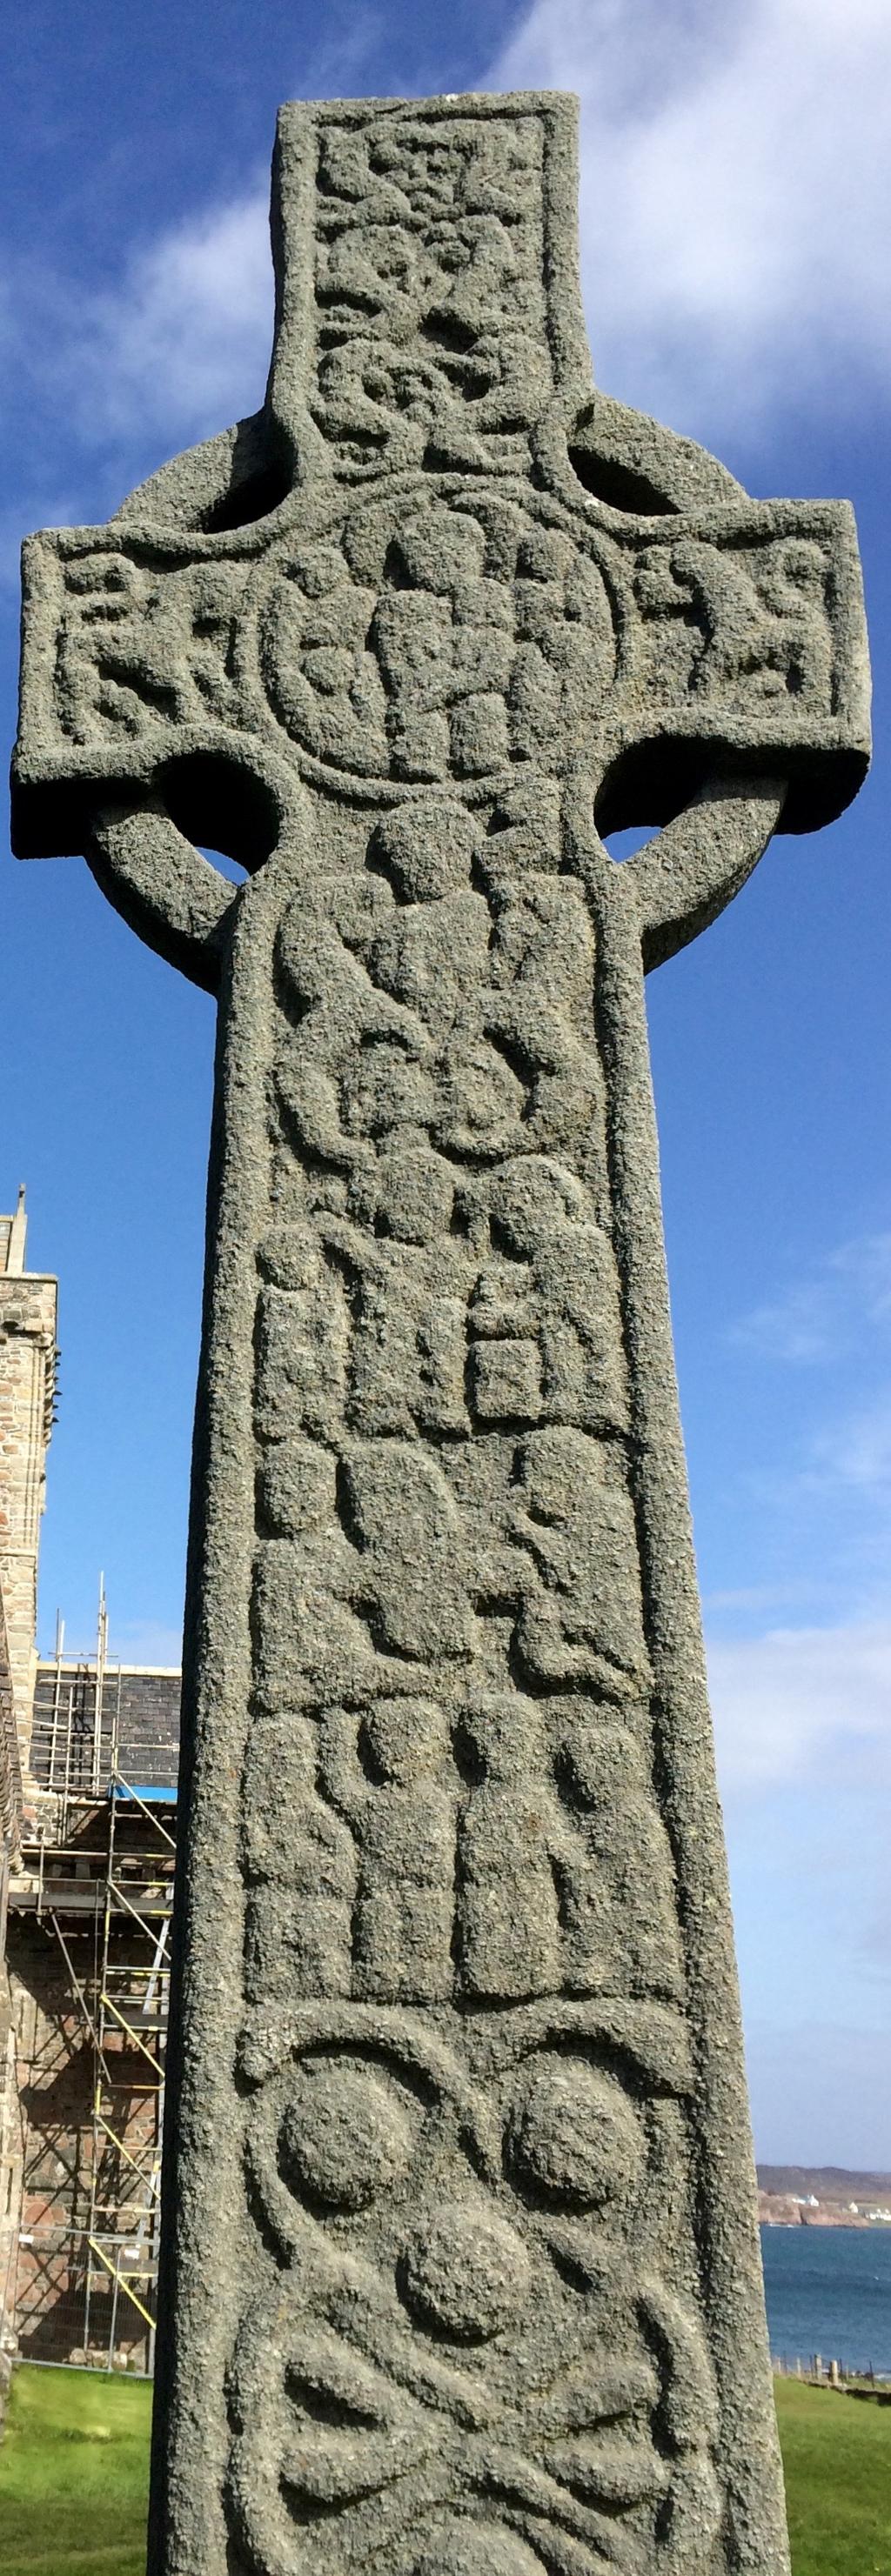 As a testament to its endurance, this cross survived numerous Viking raids, Anglo-Saxon invasions, the Norman Conquest, and perhaps most remarkably, the Protestant Reformation, which basically shut